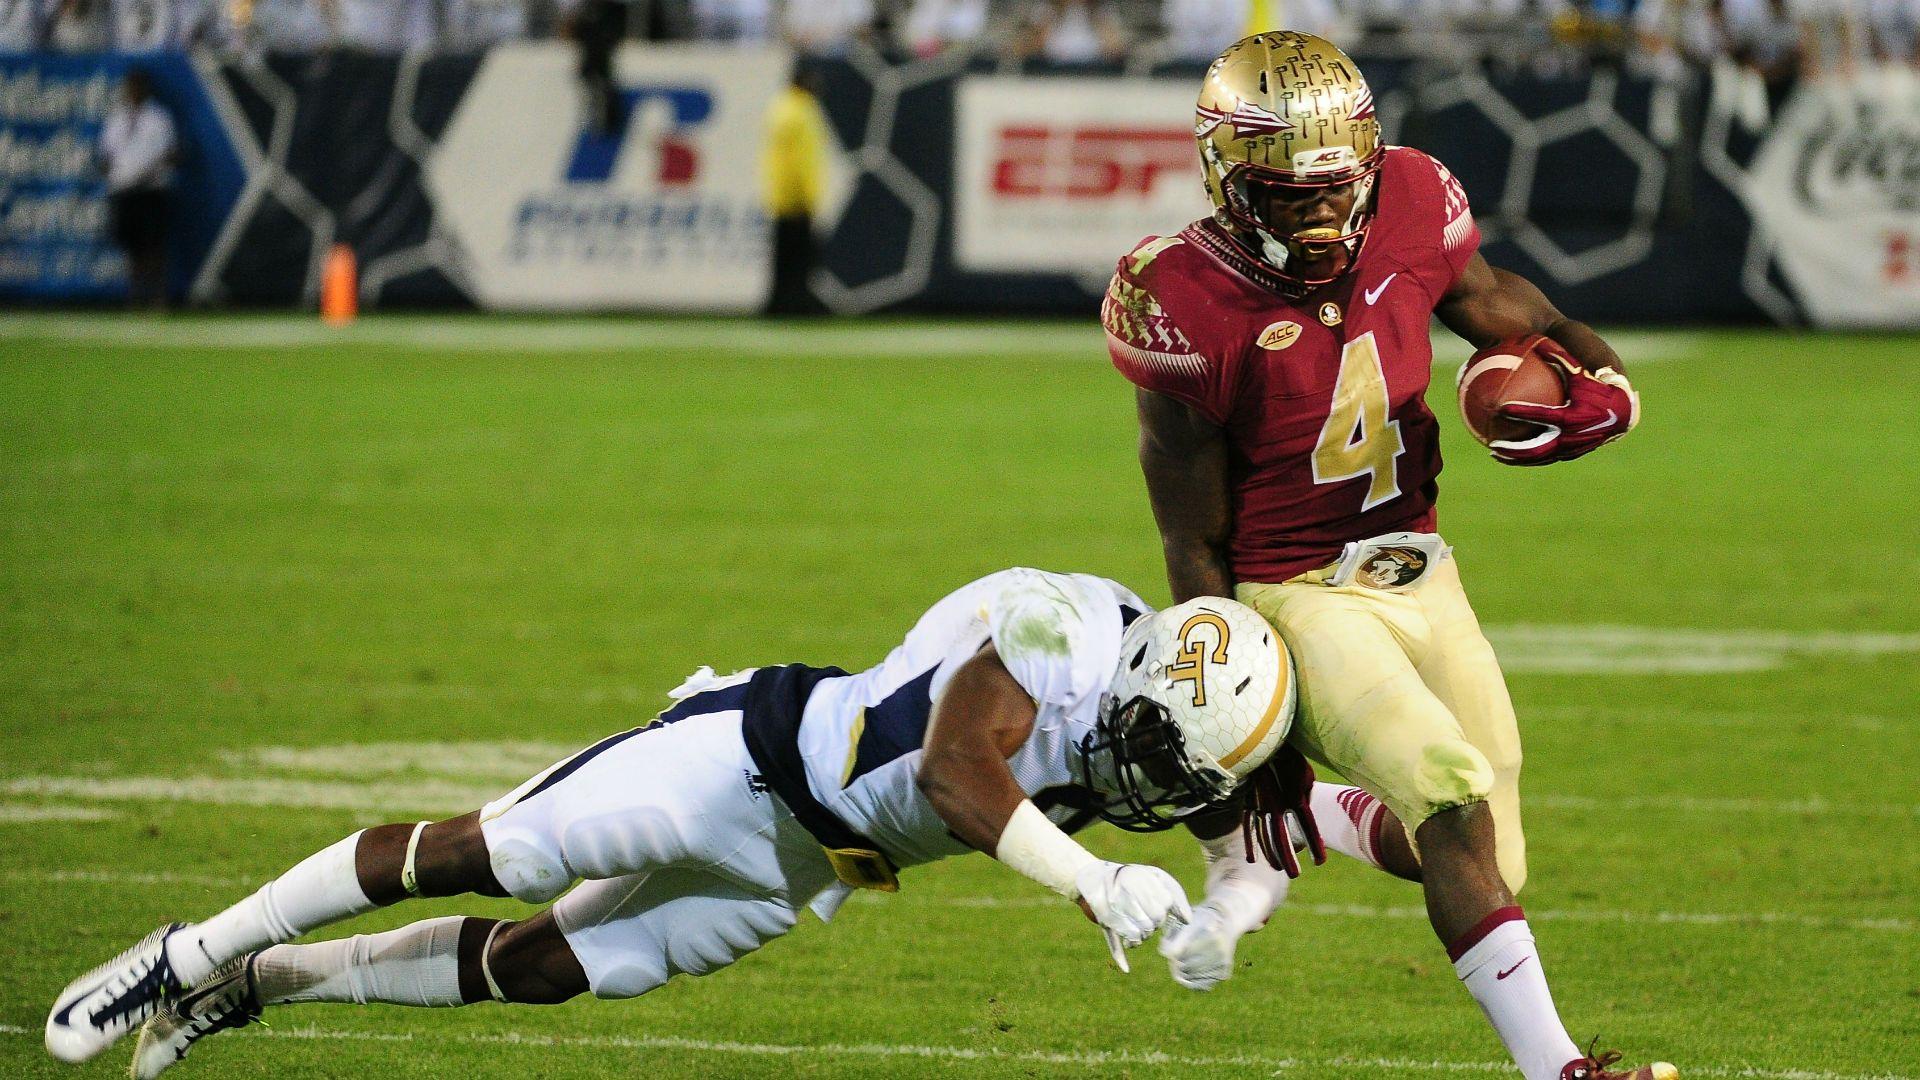 FSU RB Dalvin Cook sidelined for Syracuse game because of ankle